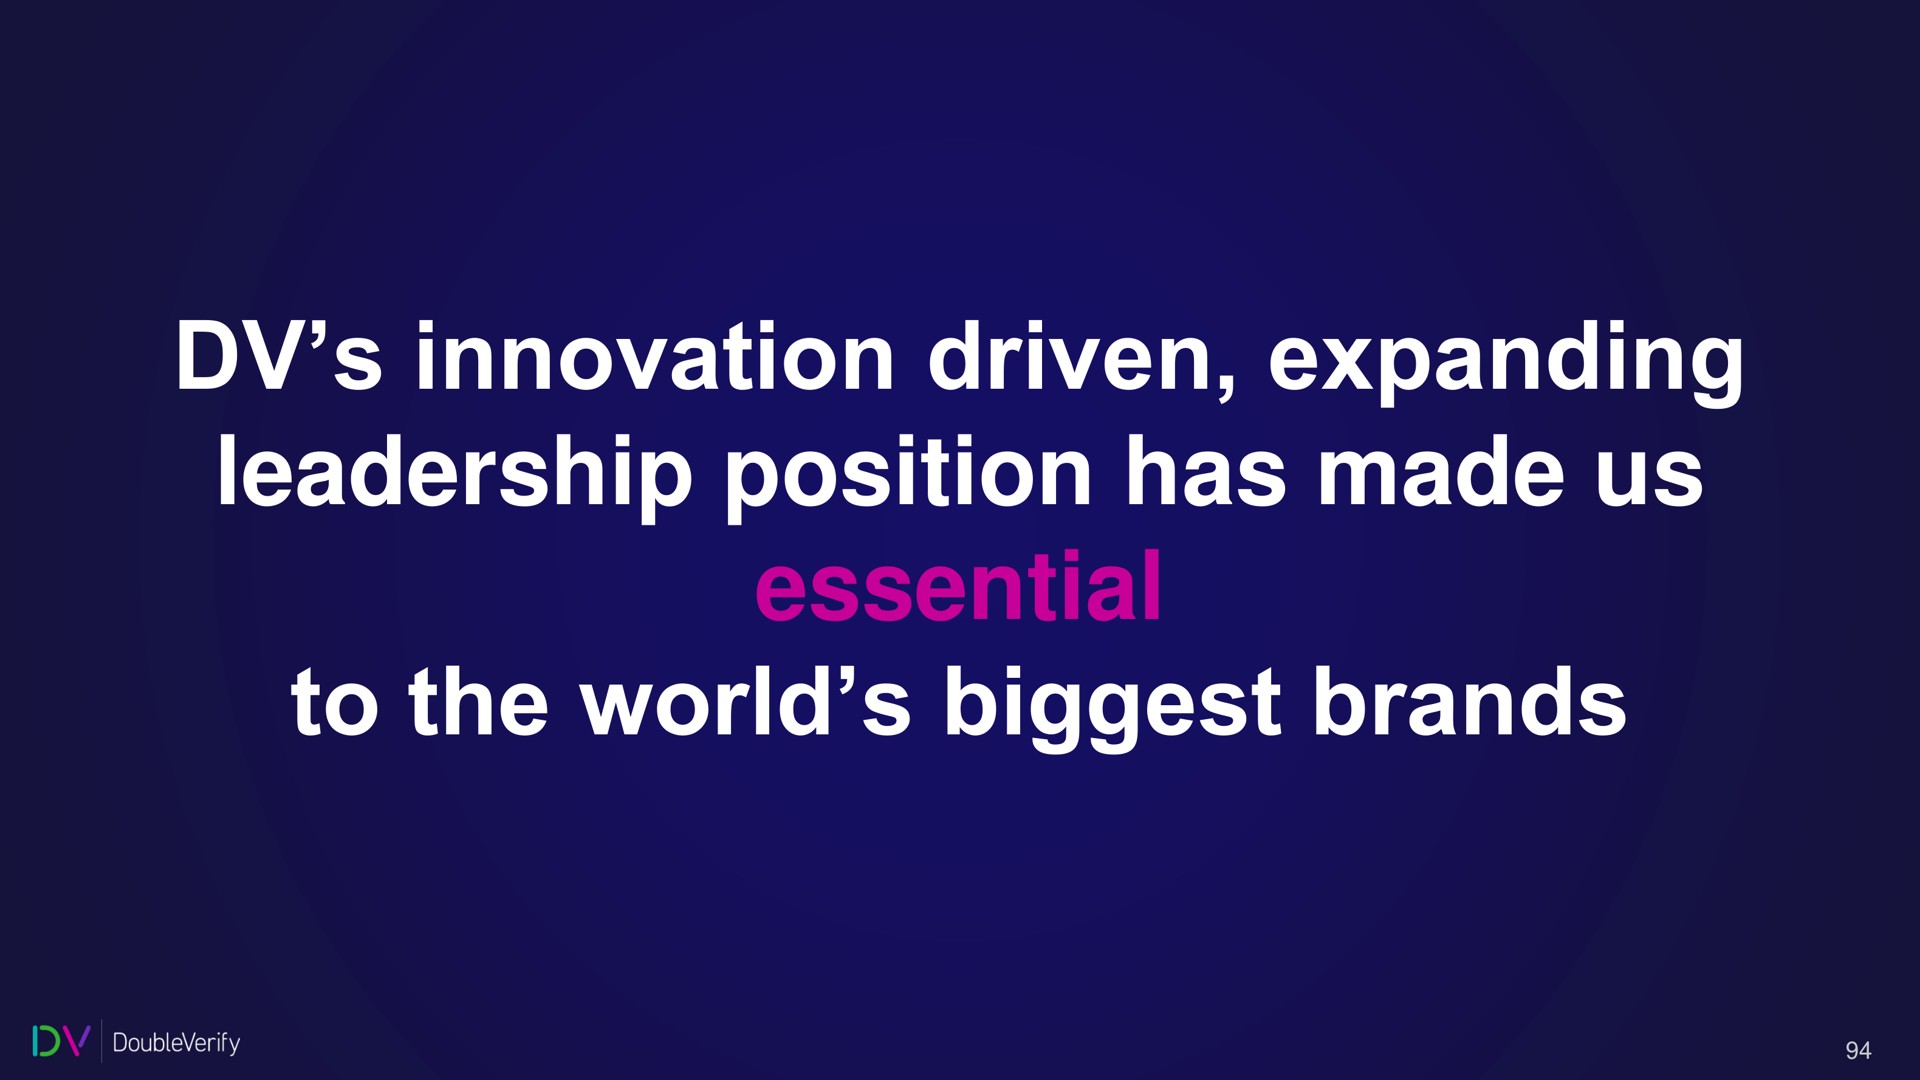 innovation driven expanding leadership position has made us essential to the world biggest brands | DoubleVerify